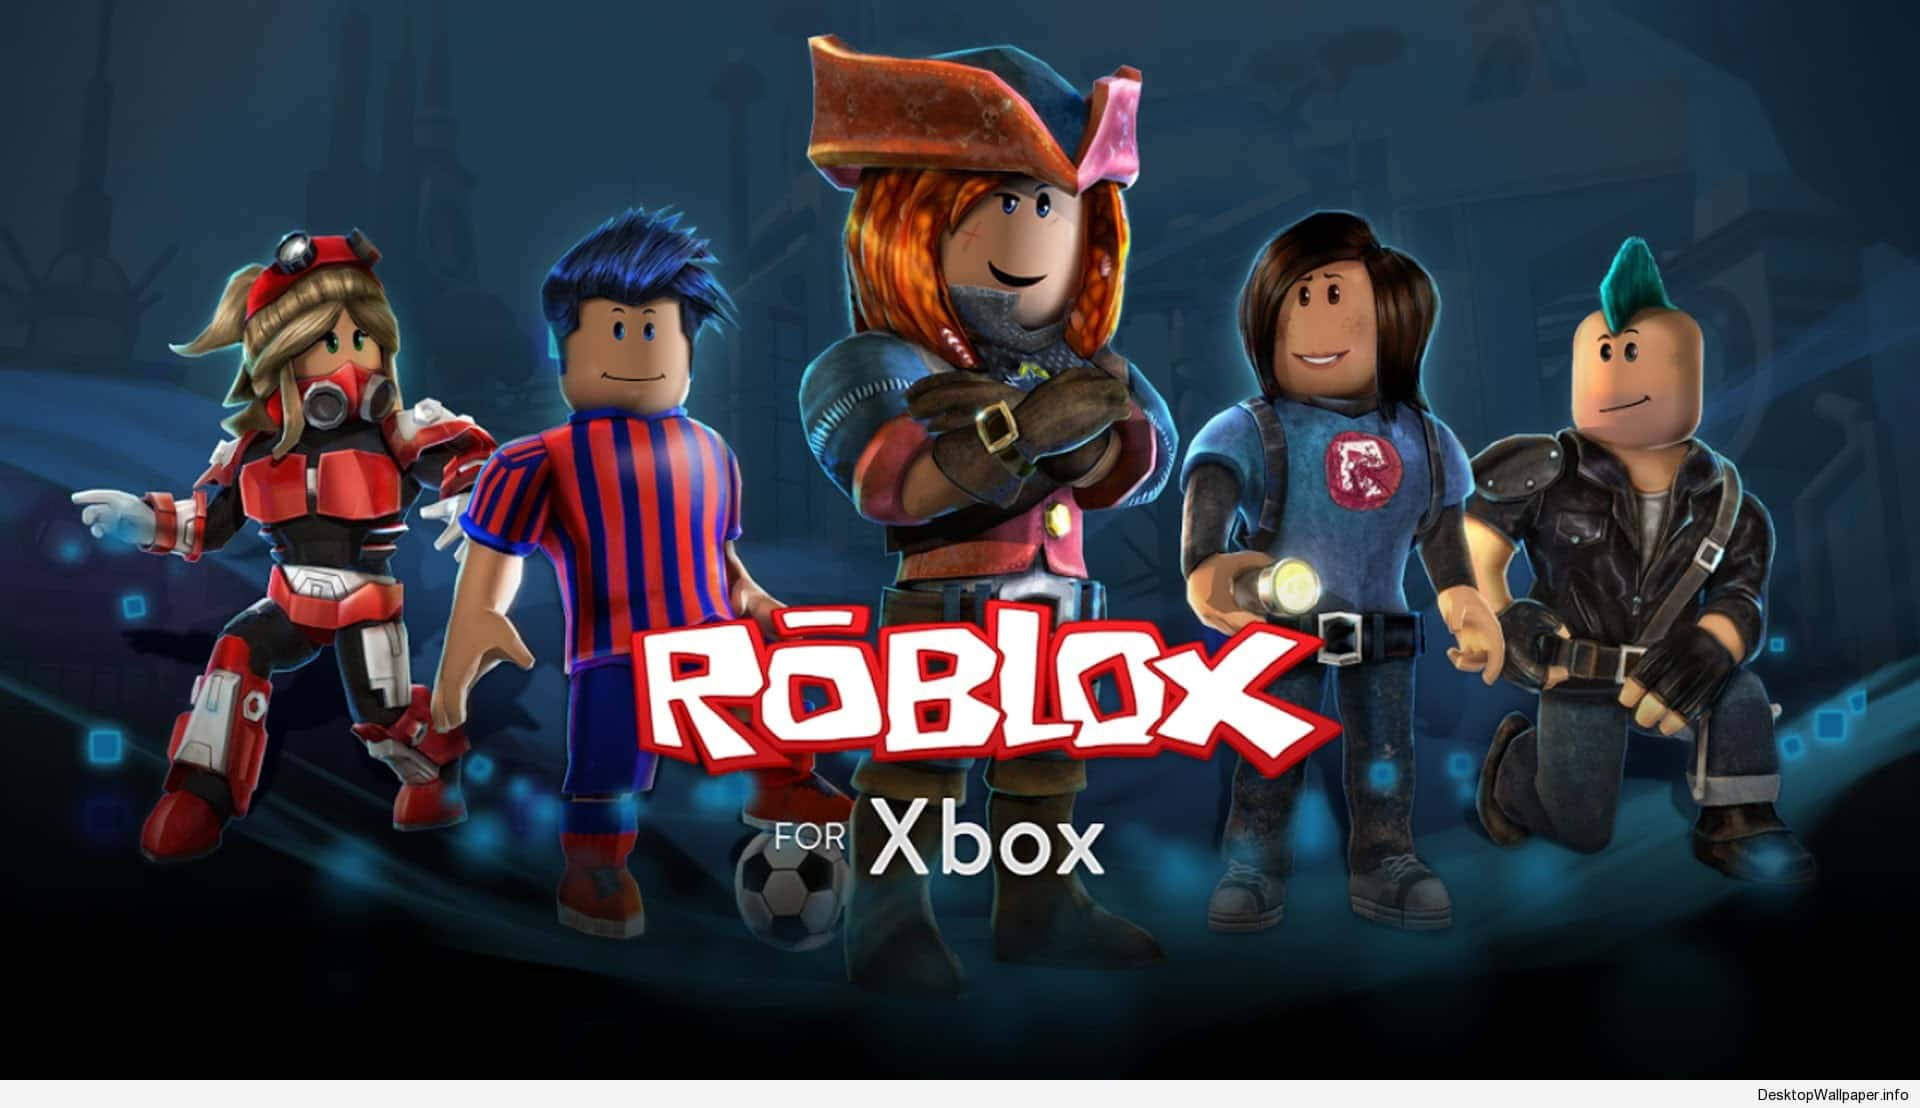 A Cool Roblox Poster for Xbox— Immerse Yourself in an Epic Gaming World! Wallpaper